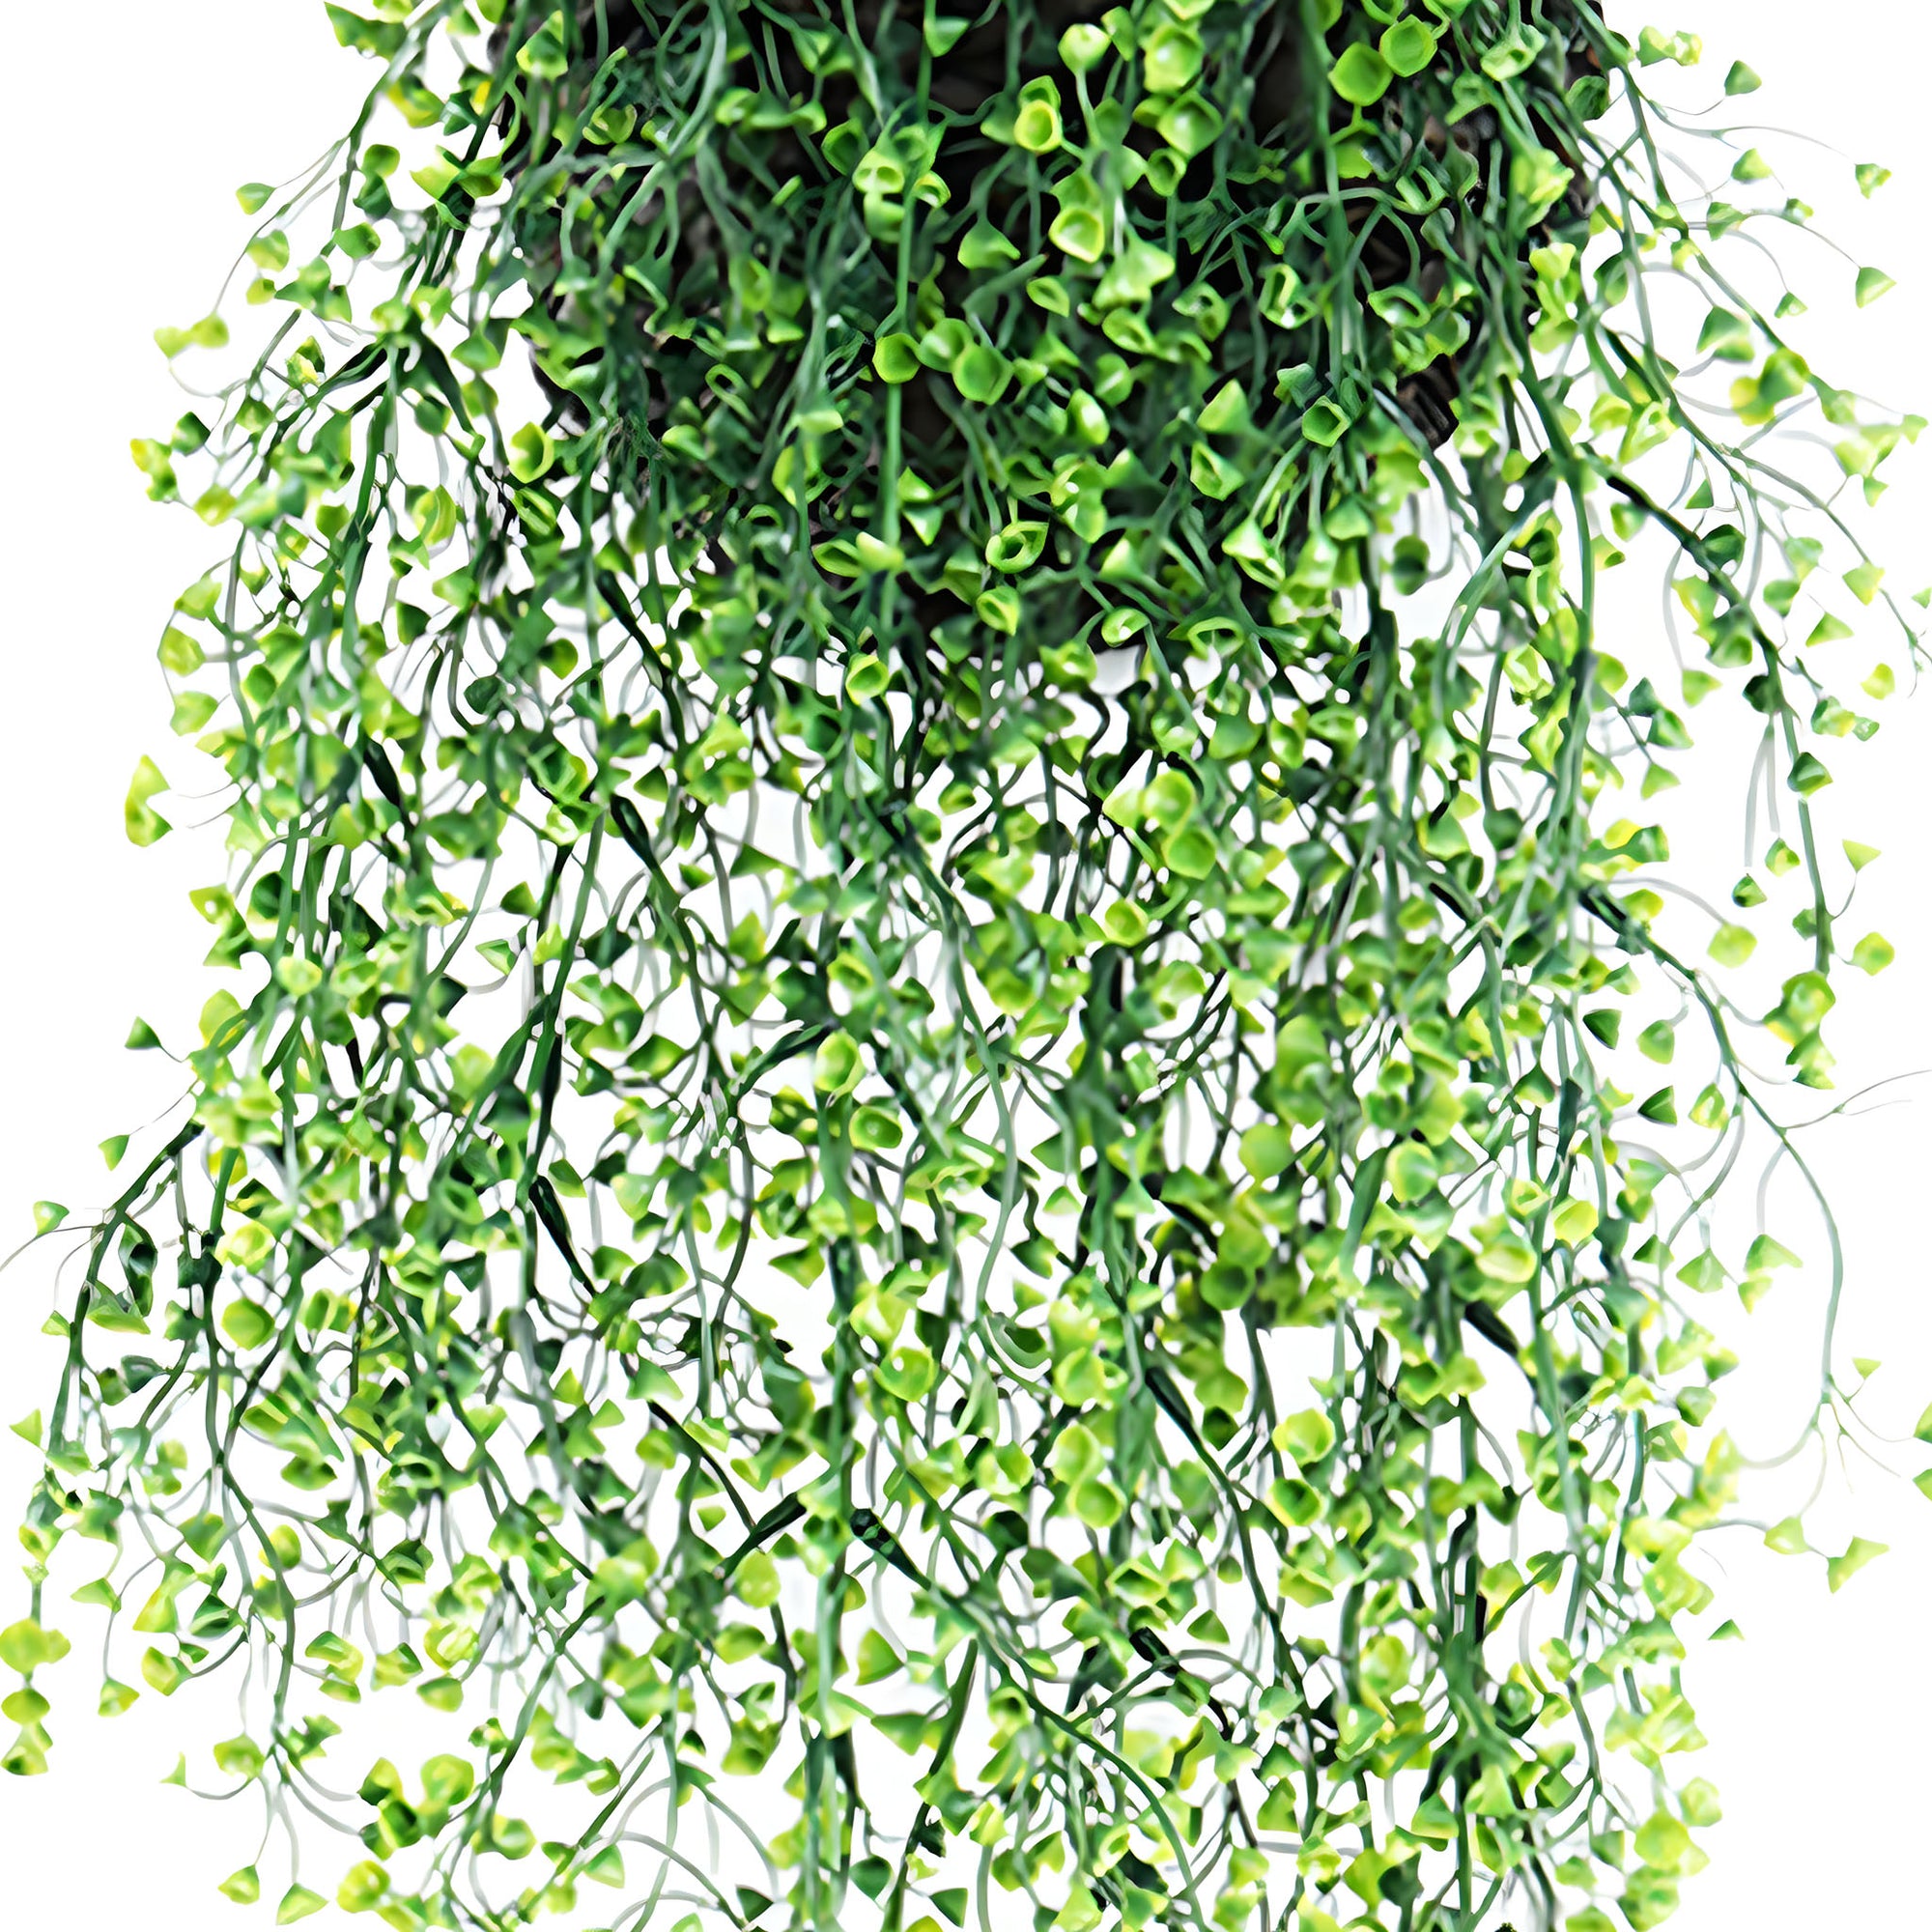 Faux Hanging Plants UV Protected Fake Greenery Vines